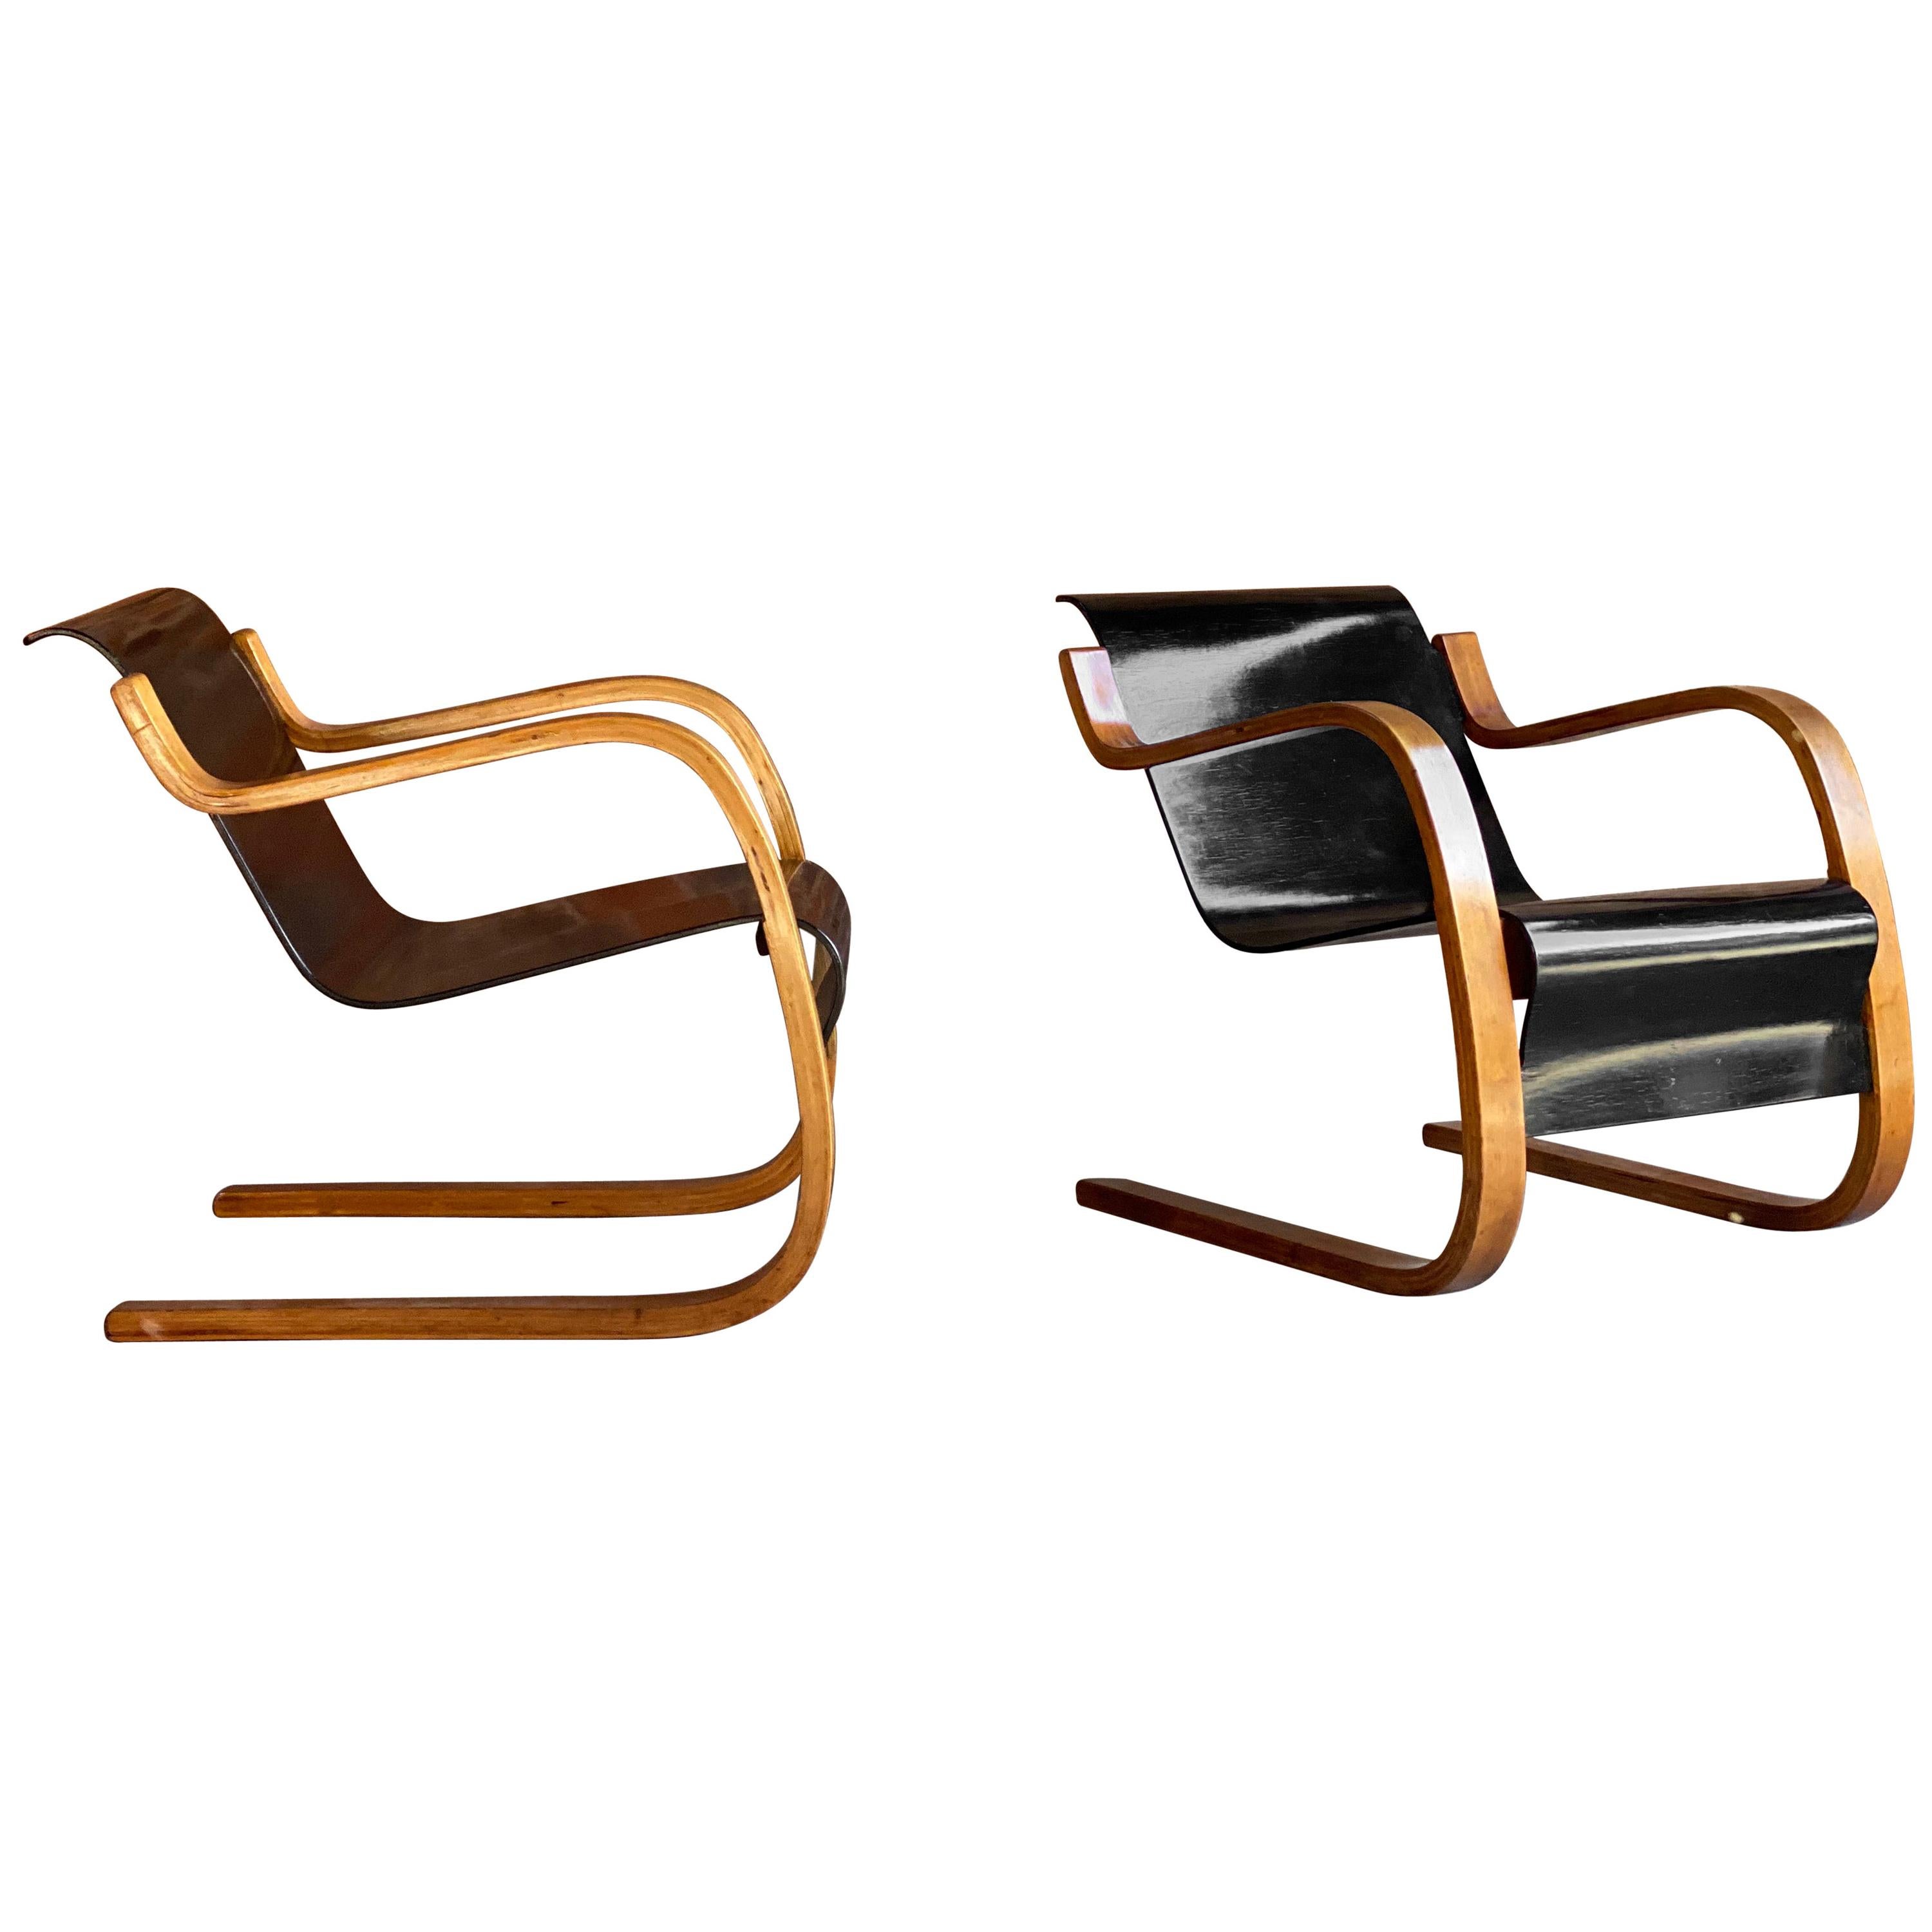 Rare pair of Alvar Aalto Model 31 armchairs for Finmar, Finland, circa 1930s 

Alvar Aalto pair of Model 31 laminated birch and plywood cantilever armchairs circa 1930s, with blackened seat and back. Designed by Alvar Aalto for Finmar. With